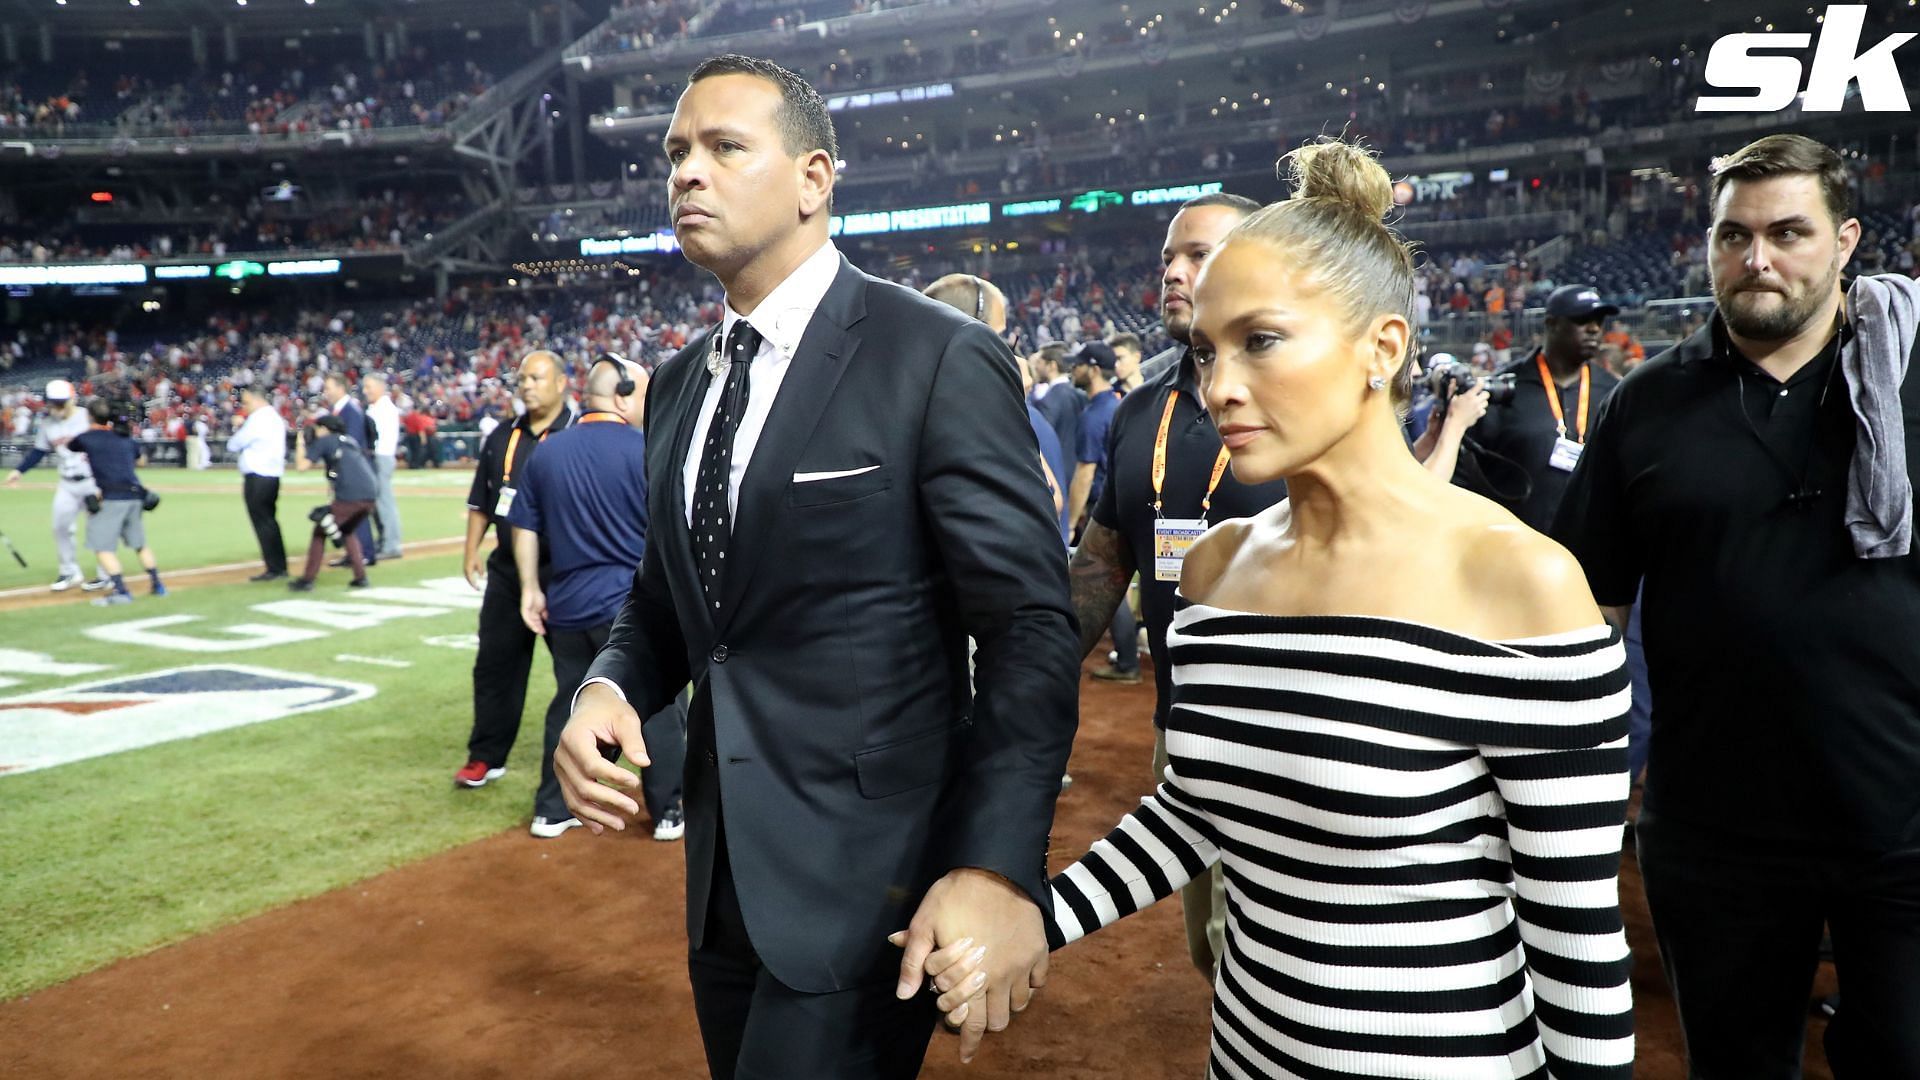 Alex Rodriguez once opened up on how his first date with ex-fiancee Jennifer Lopez went